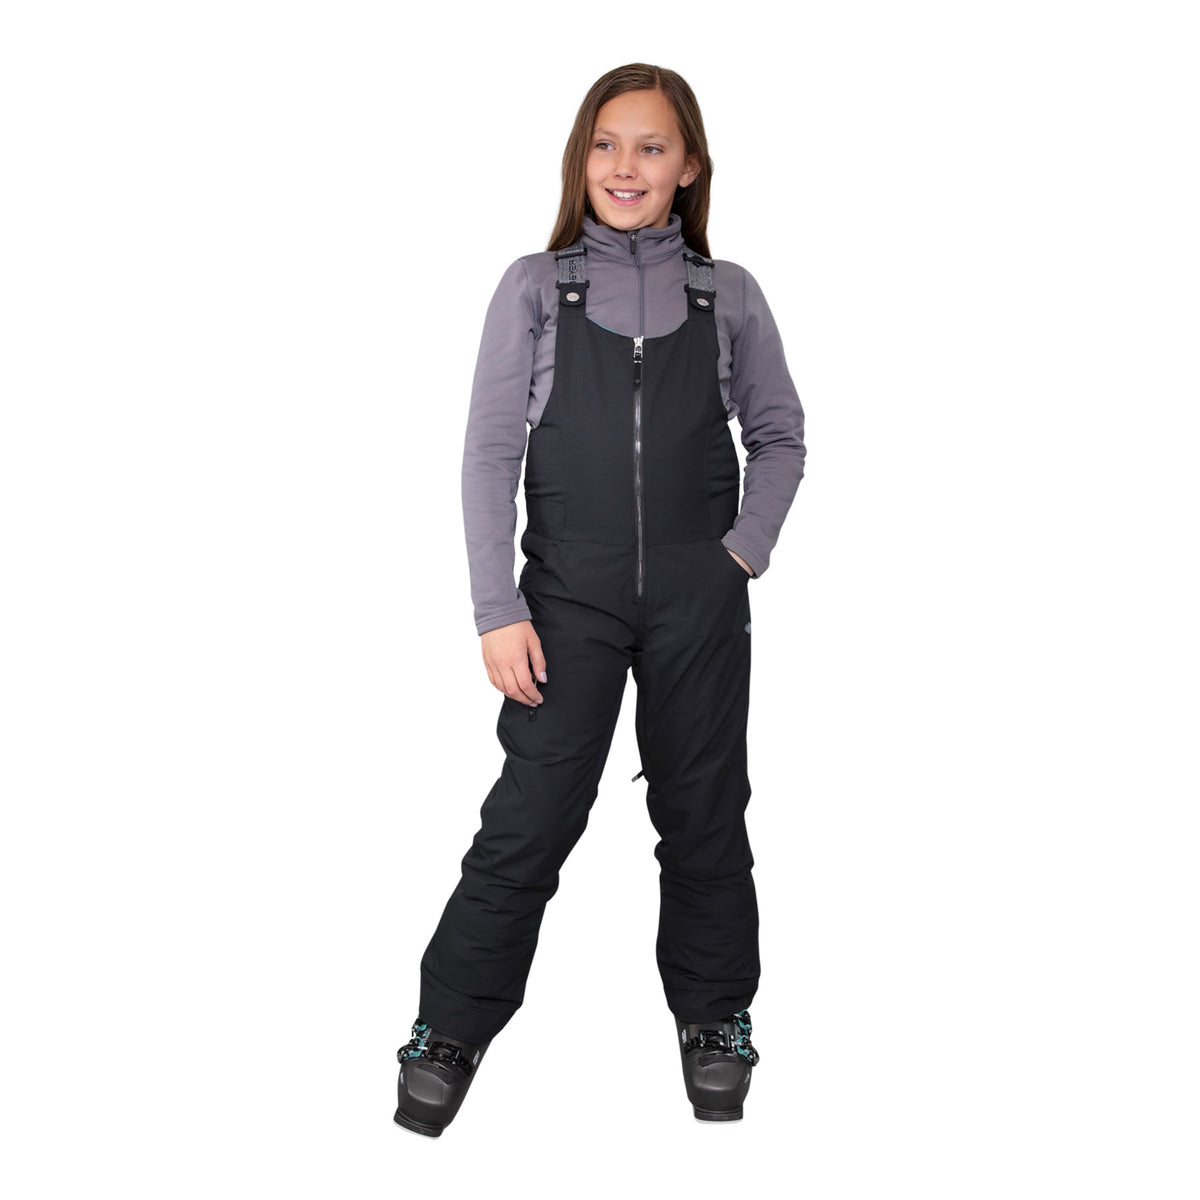 Hero image featuring a model wearing the Obermeyer girls Any Bib Pant in black with black ski boots and a grey long sleeve.